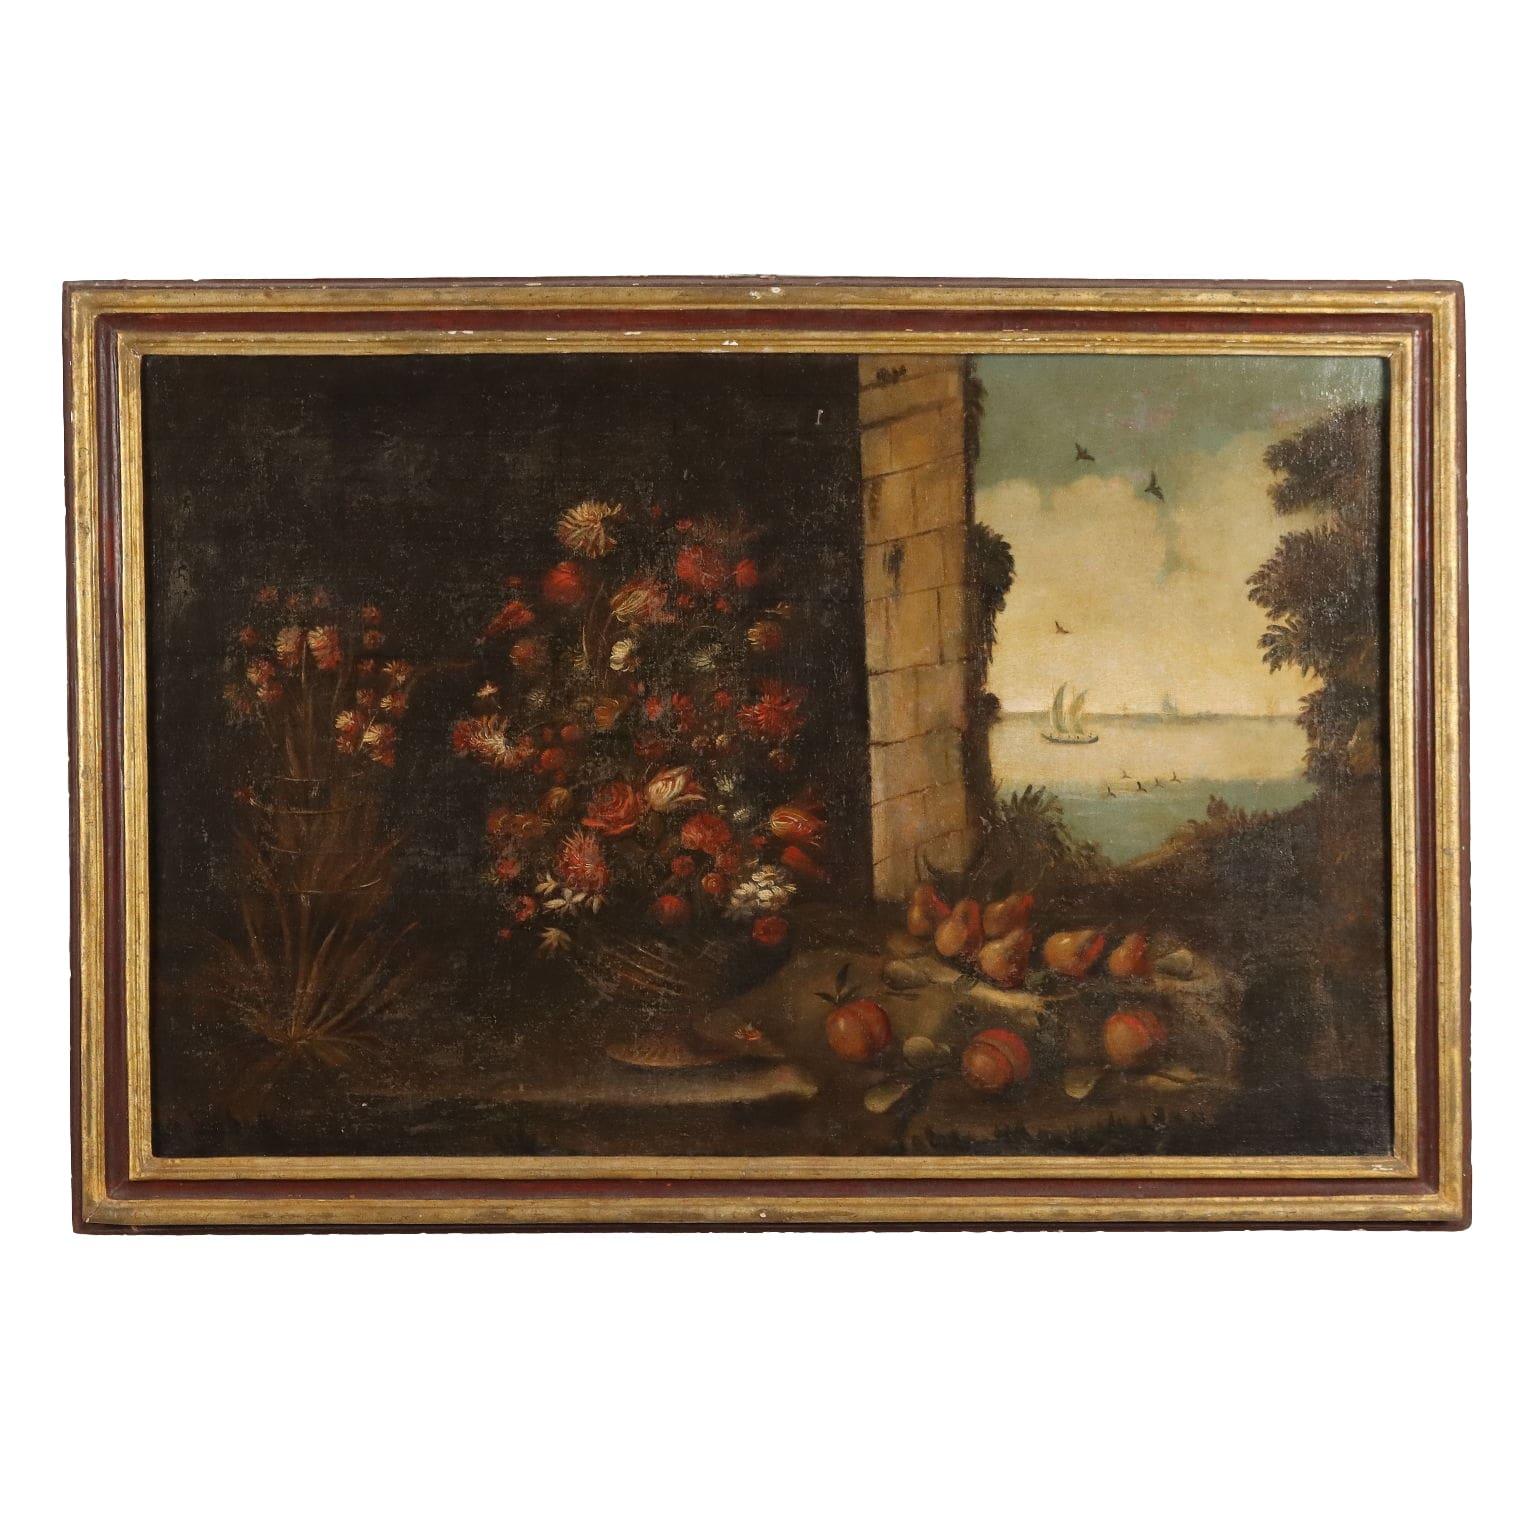 Unknown Still-Life Painting - Painting Still Life with Flowers and Fruit 17th-18th century